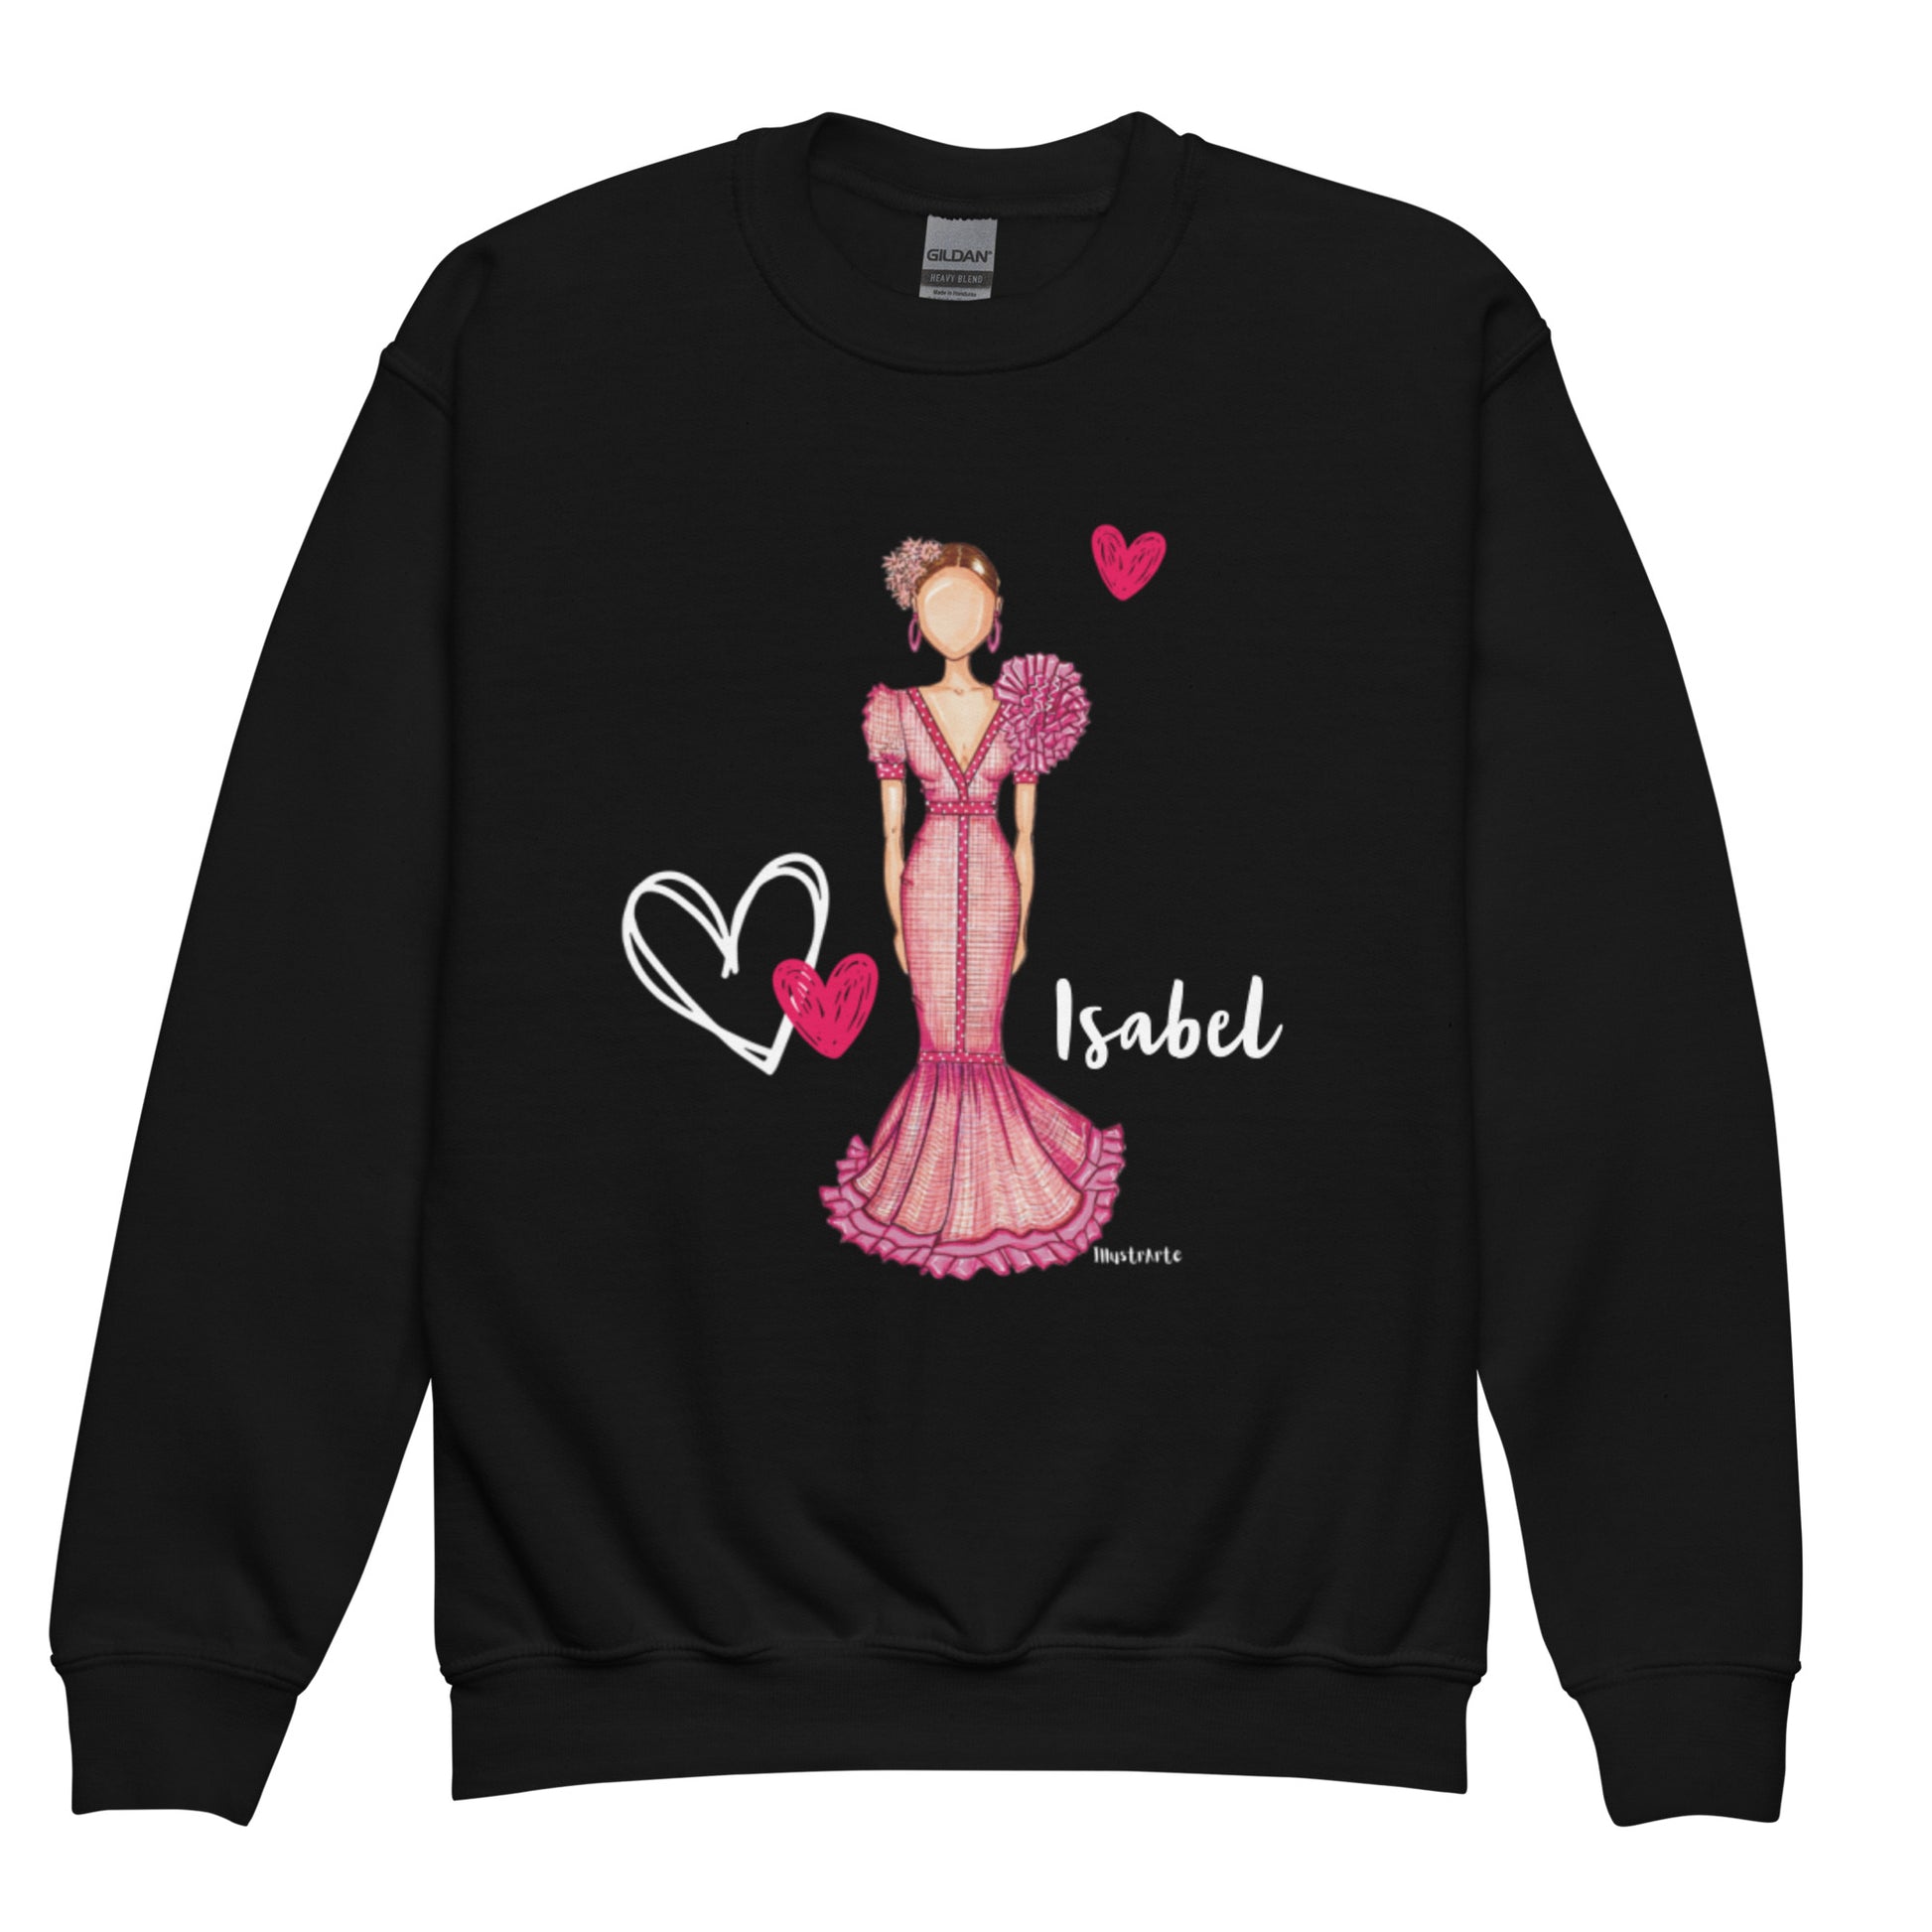 a black sweater with a pink dress and hearts